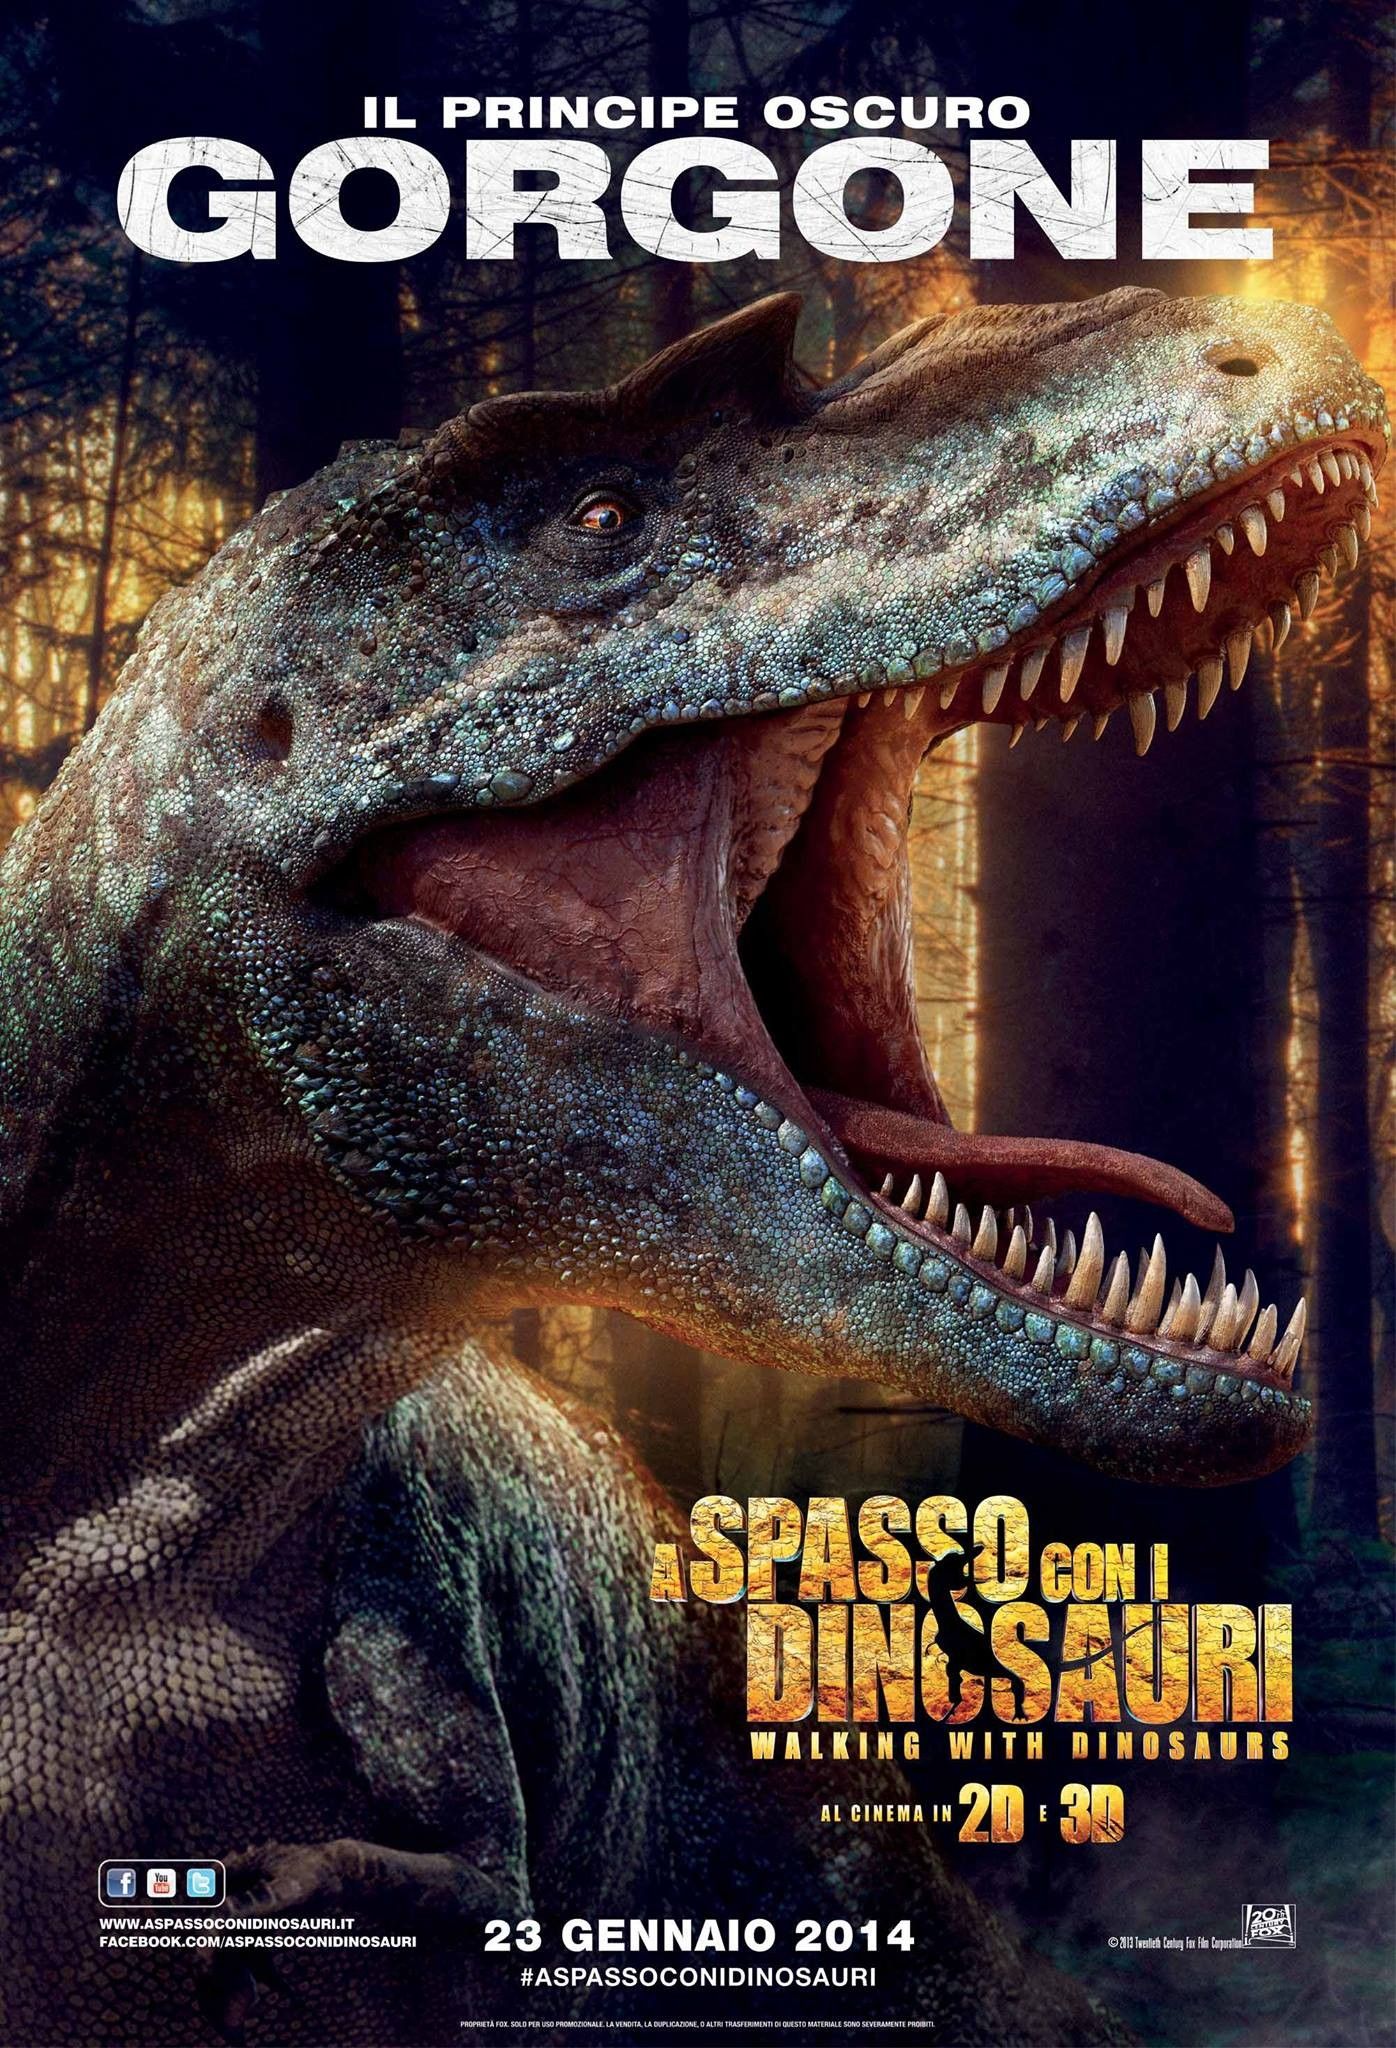 Gorgone Walking With Dinosaurs Poster